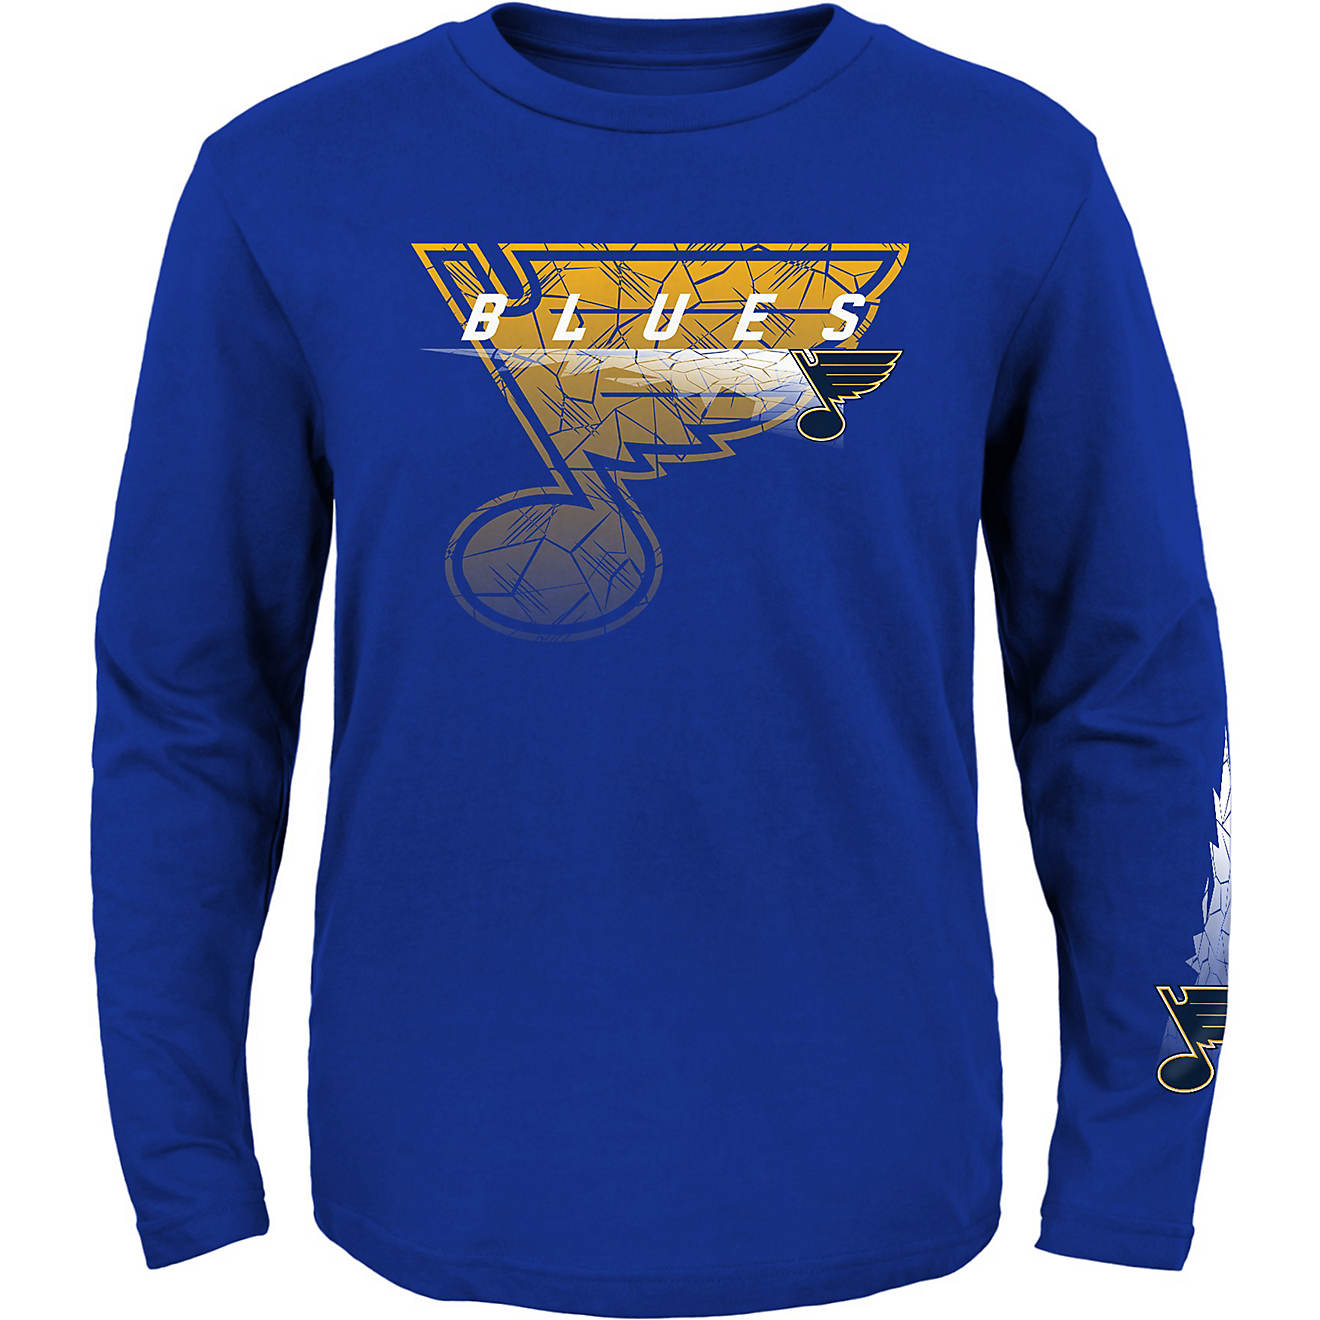 Outerstuff Boys’ St. Louis Blues Cracked Ice Long Sleeve T-shirt                                                               - view number 1